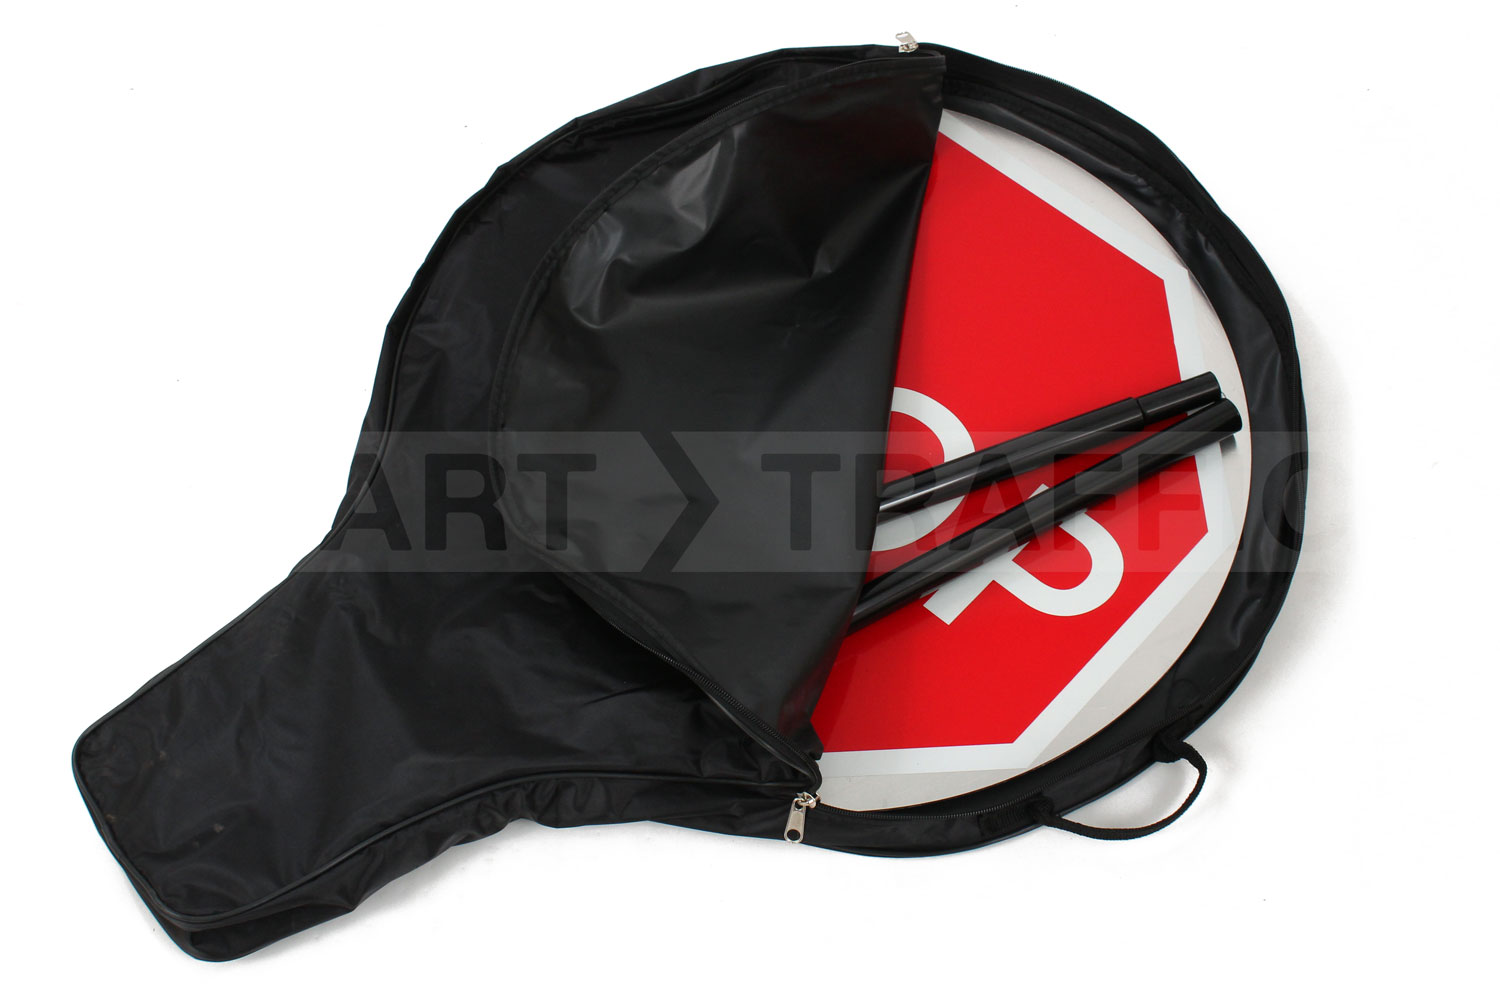 Protective Carry Bag